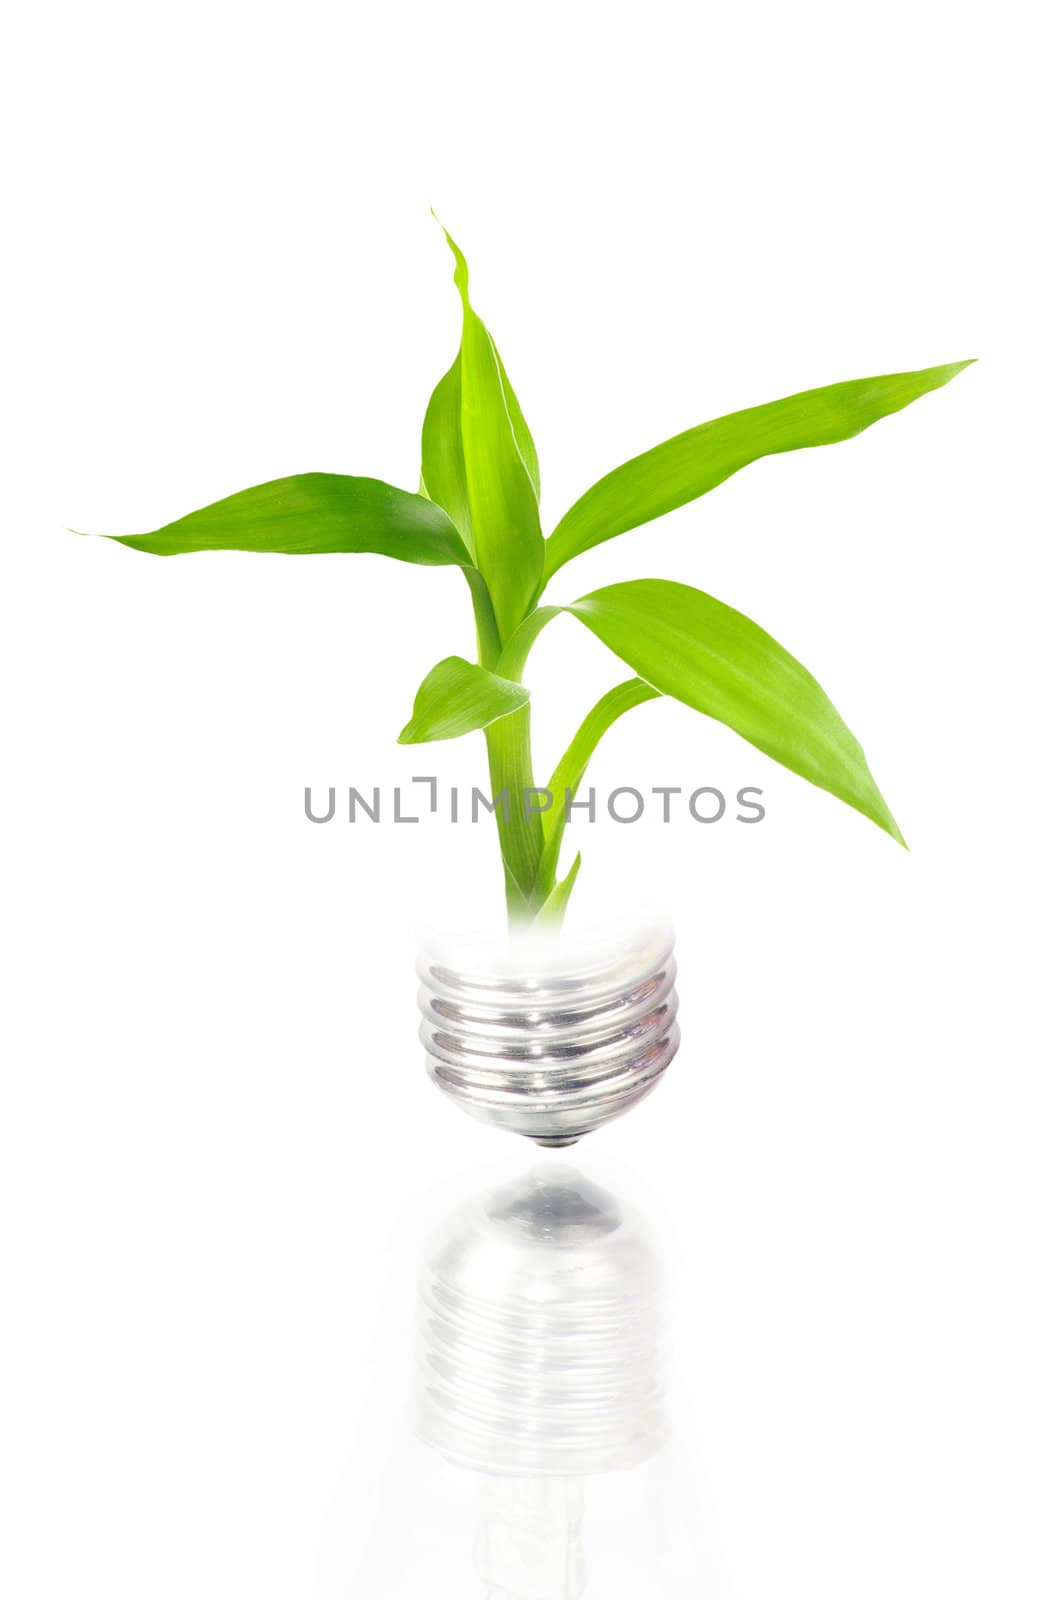 eco concept: light bulb with plant inside by oly5